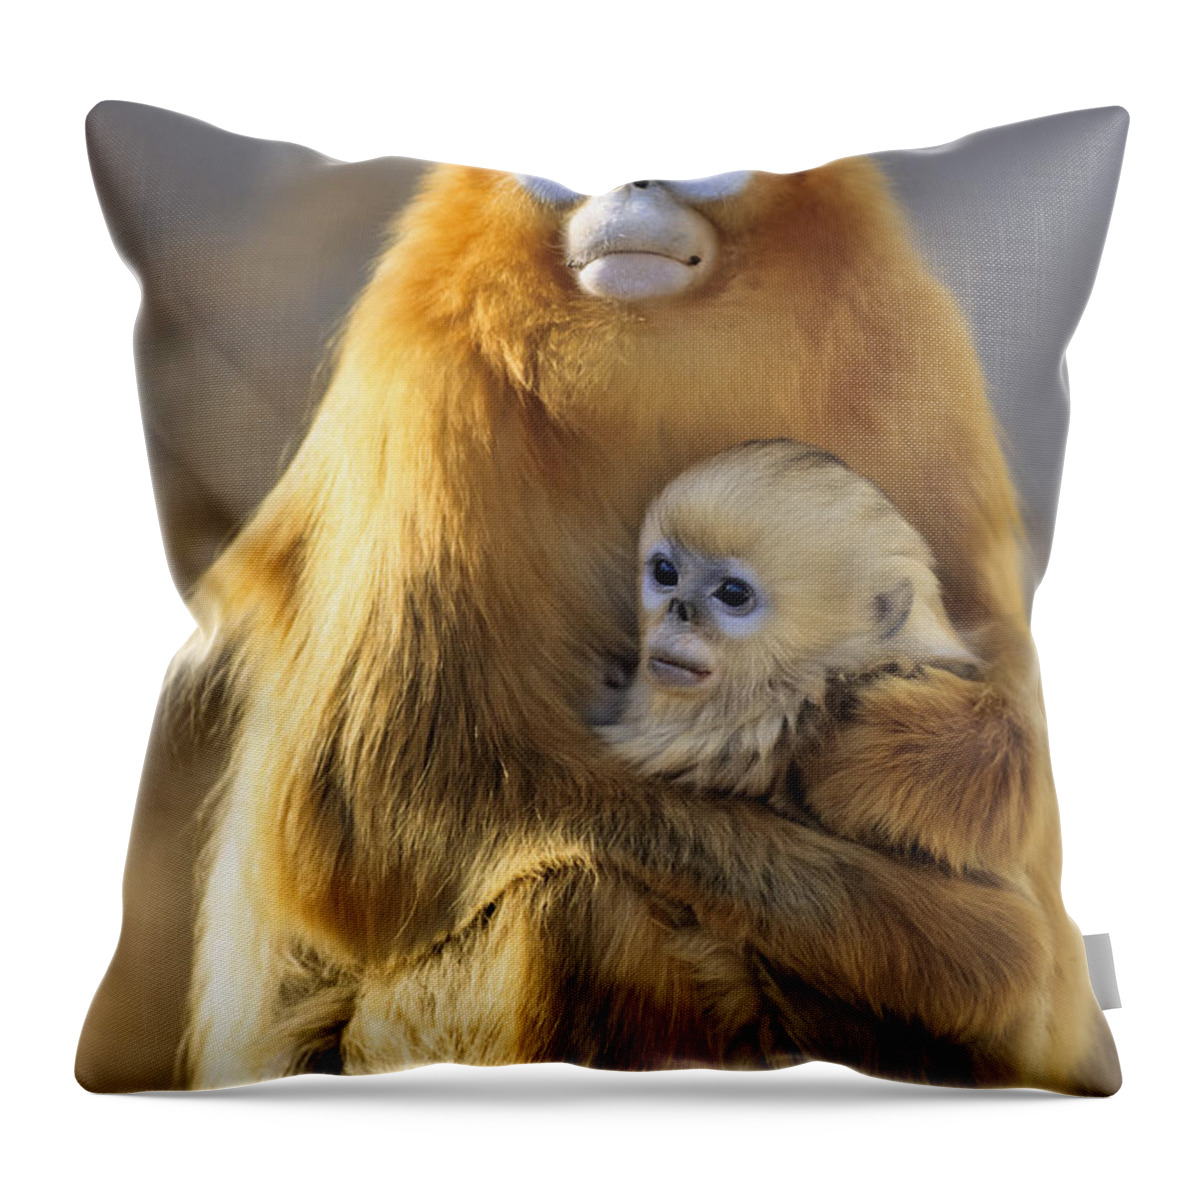 Feb0514 Throw Pillow featuring the photograph Golden Snub-nosed Monkey And Baby China by Konrad Wothe